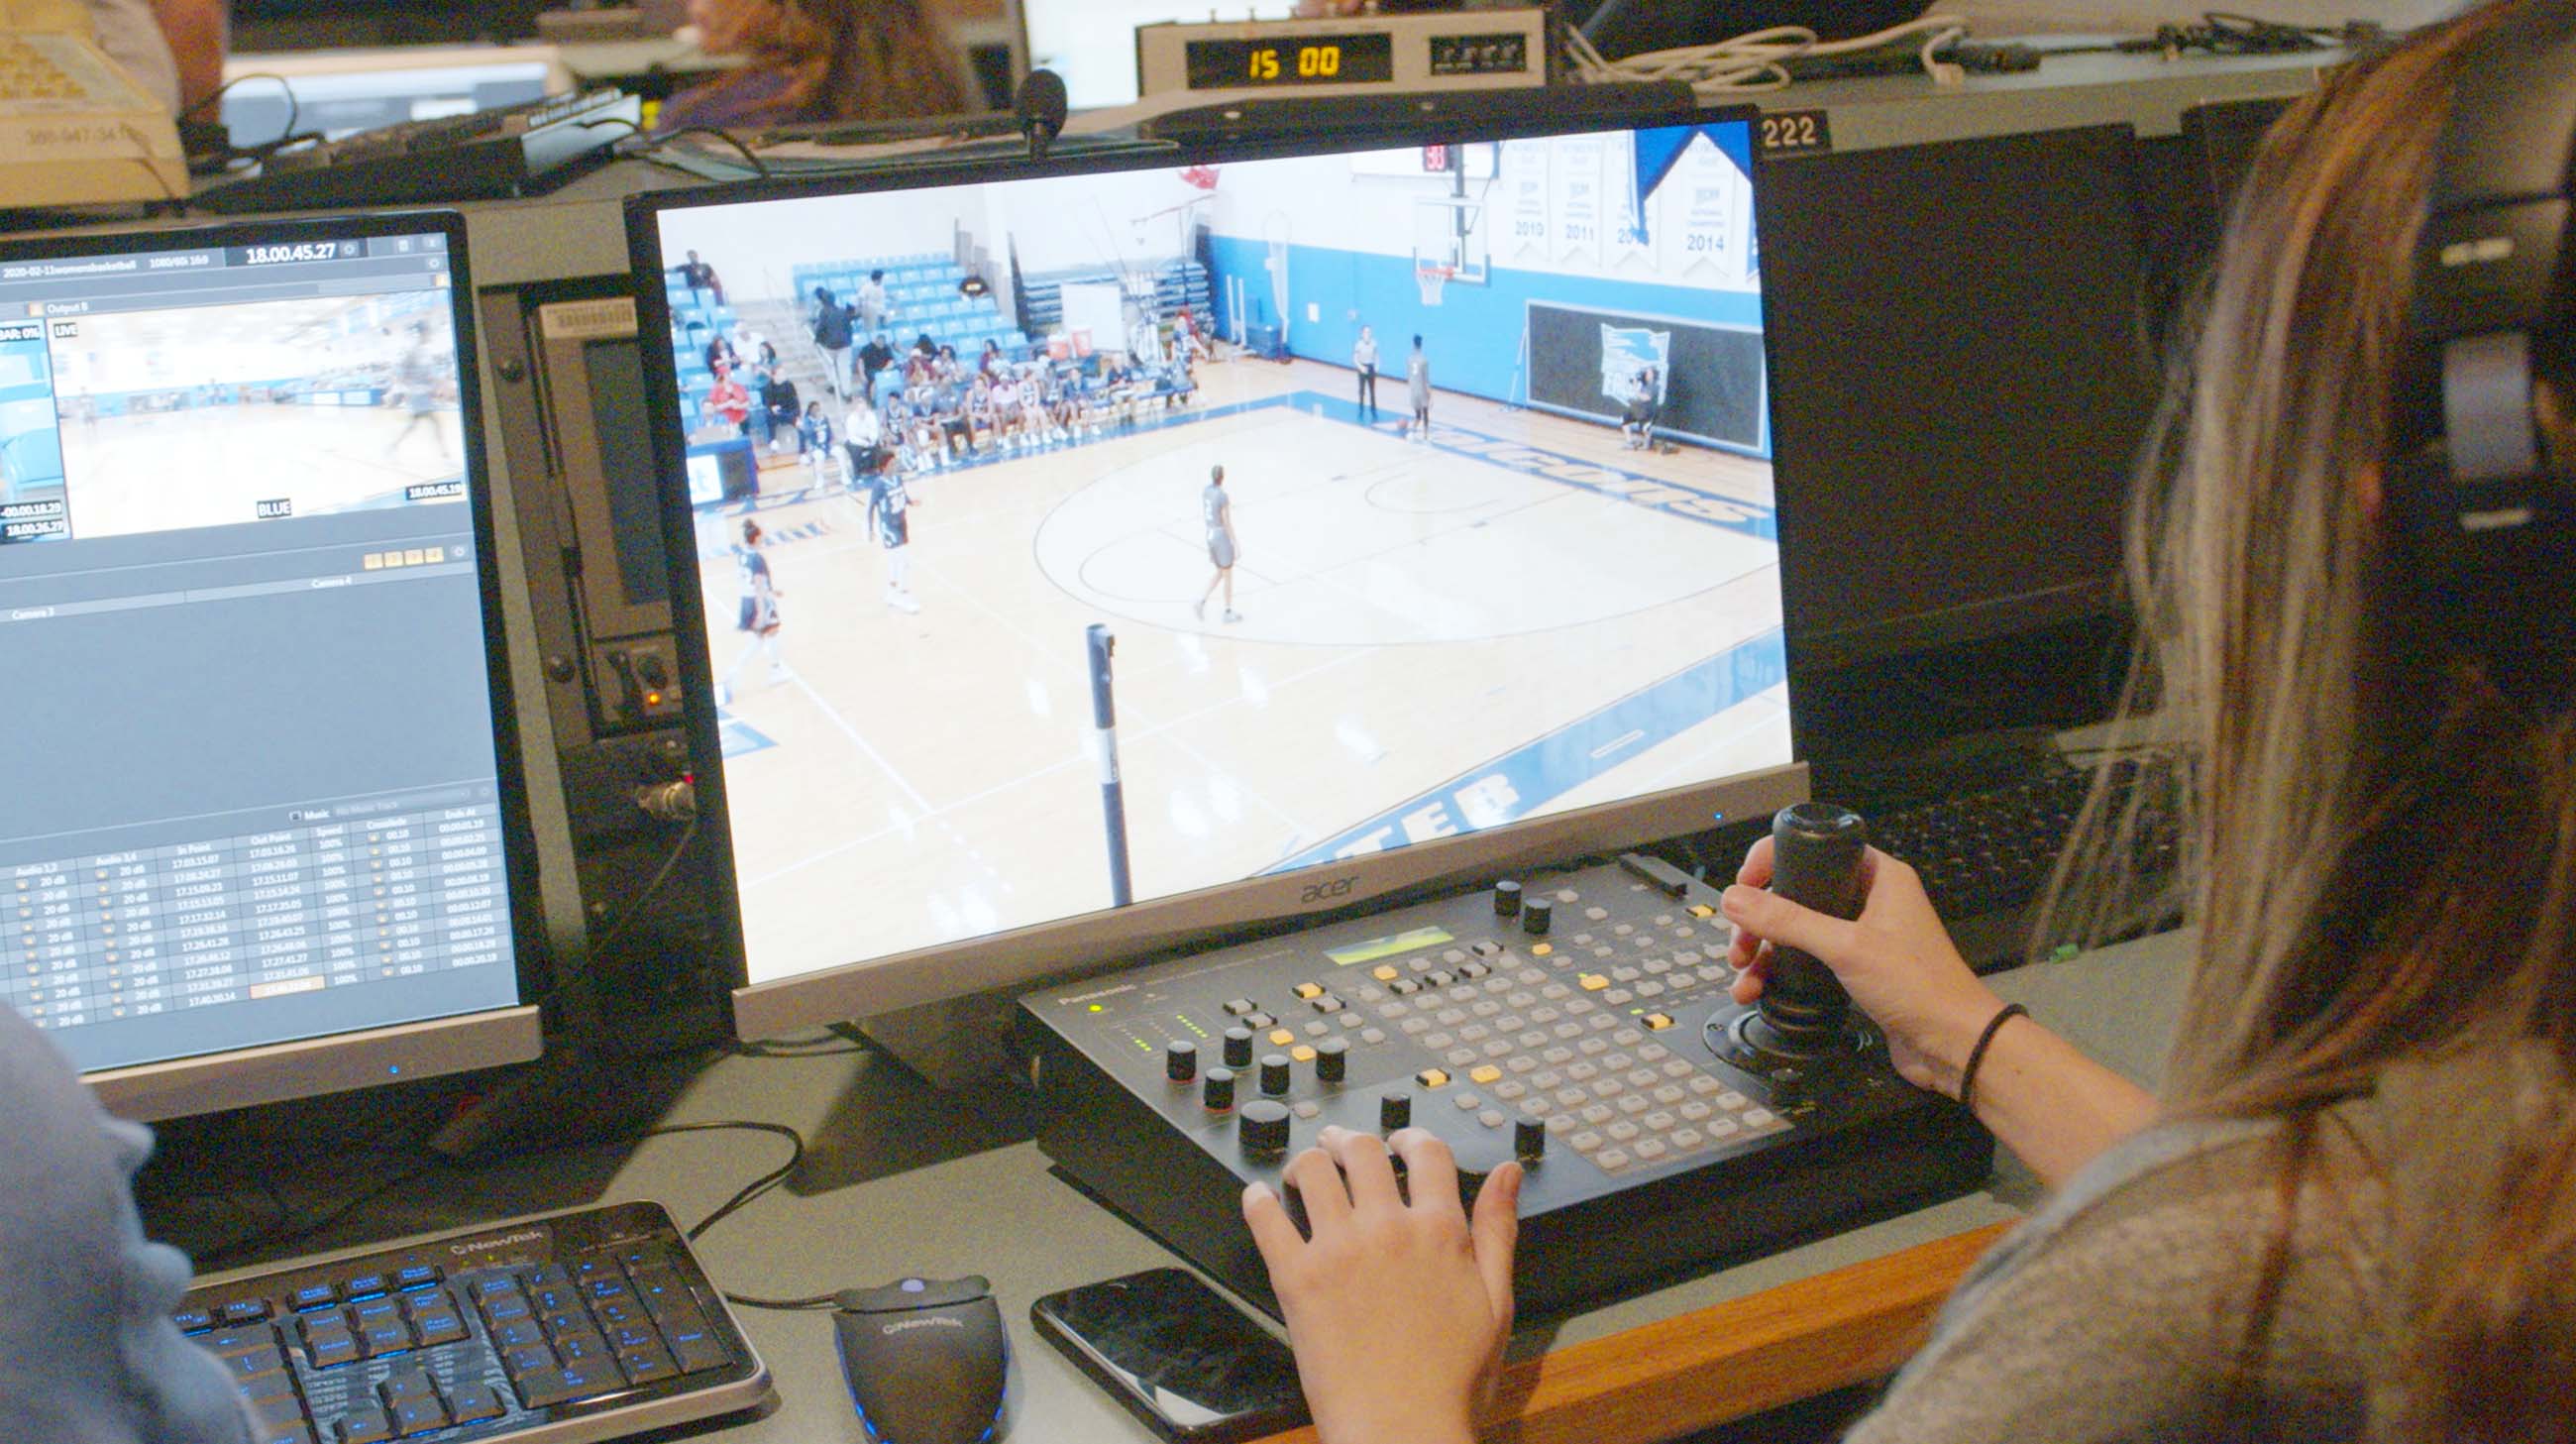 Student remotely operating a TV production camera during broadcast.